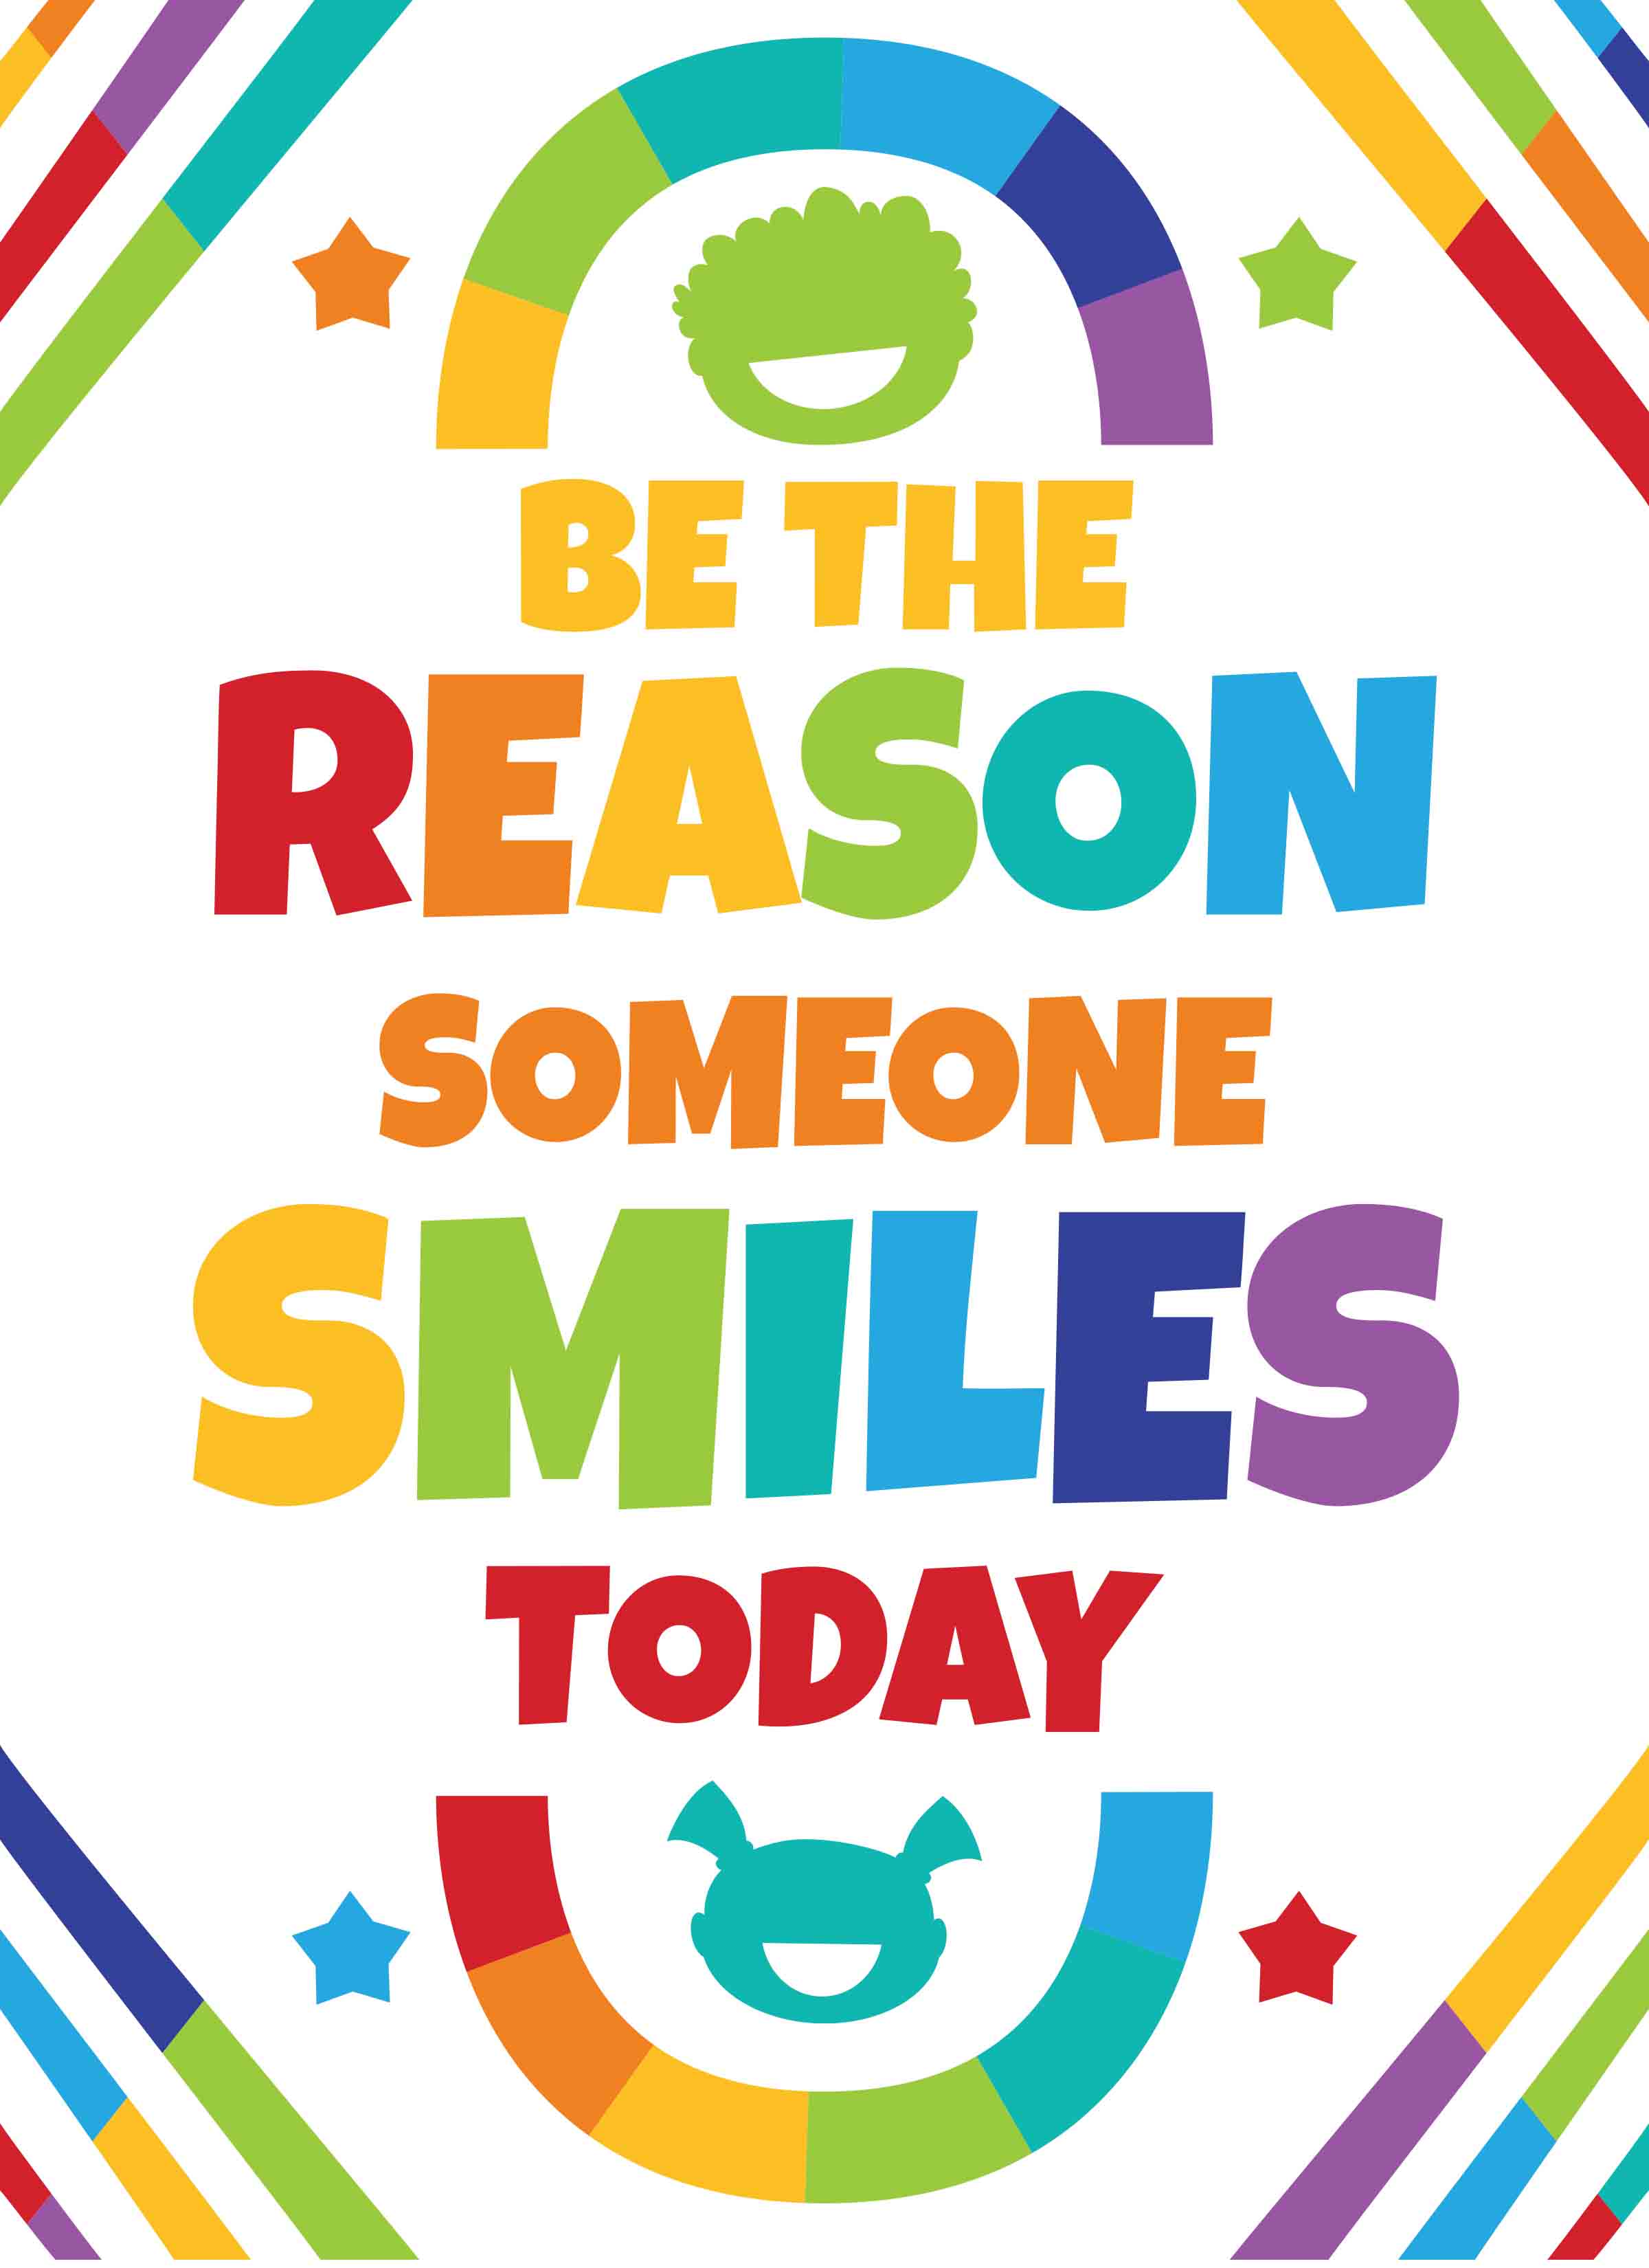 Print Your Own Posters - Be the Reason Someone Smiles | Sproutbrite